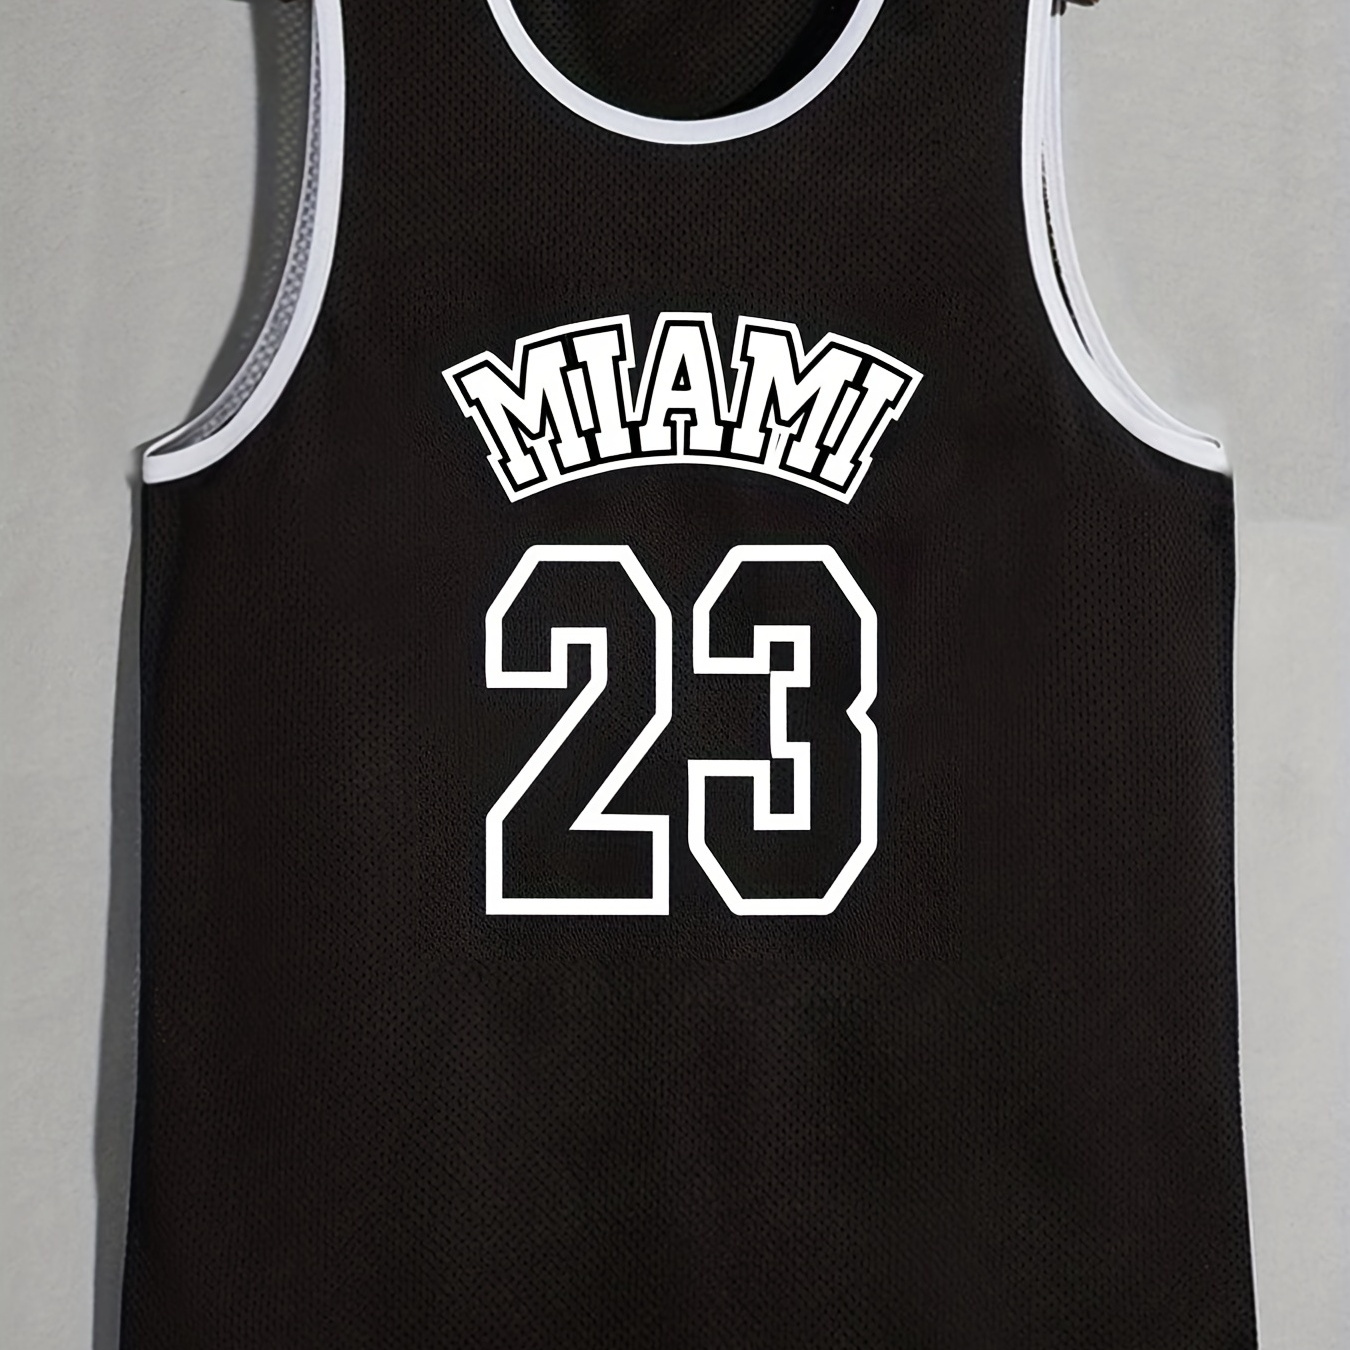 

Men's Basketball Tank Top, Miami 23 Print Sports Top, Breathable Sports Uniform For Training And Competition